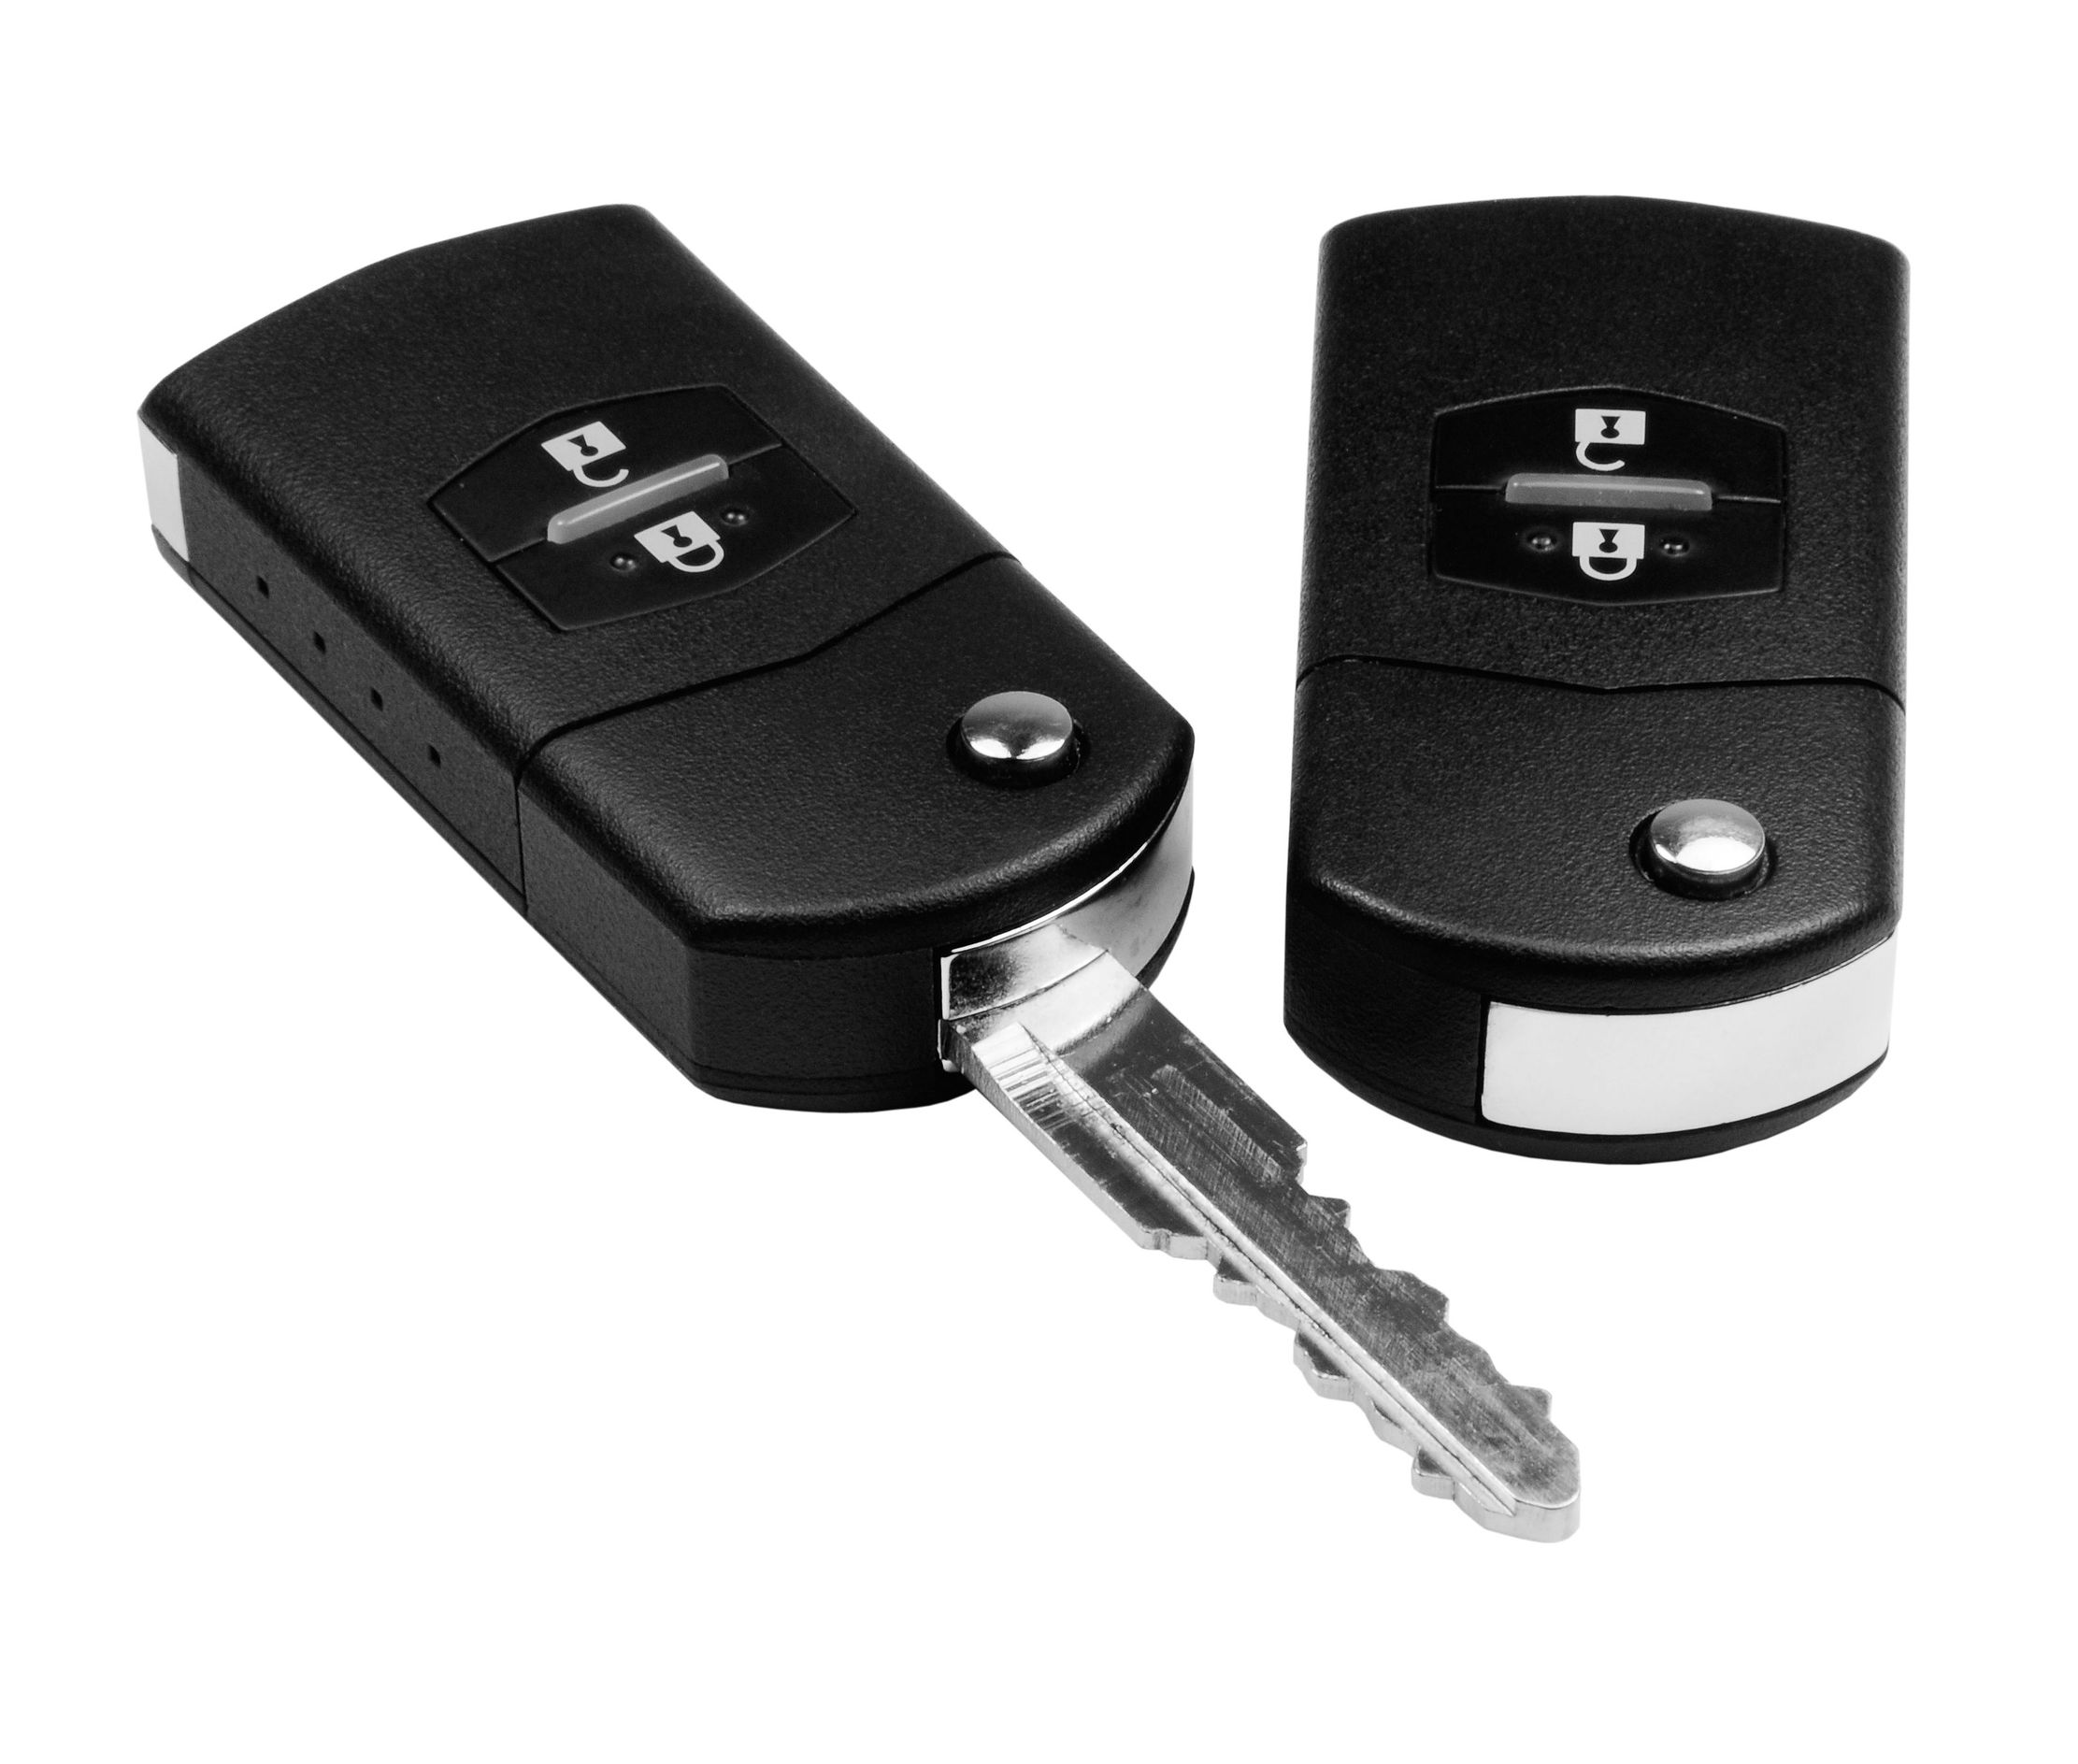 Depending on The Services of a Car locksmith in Niles